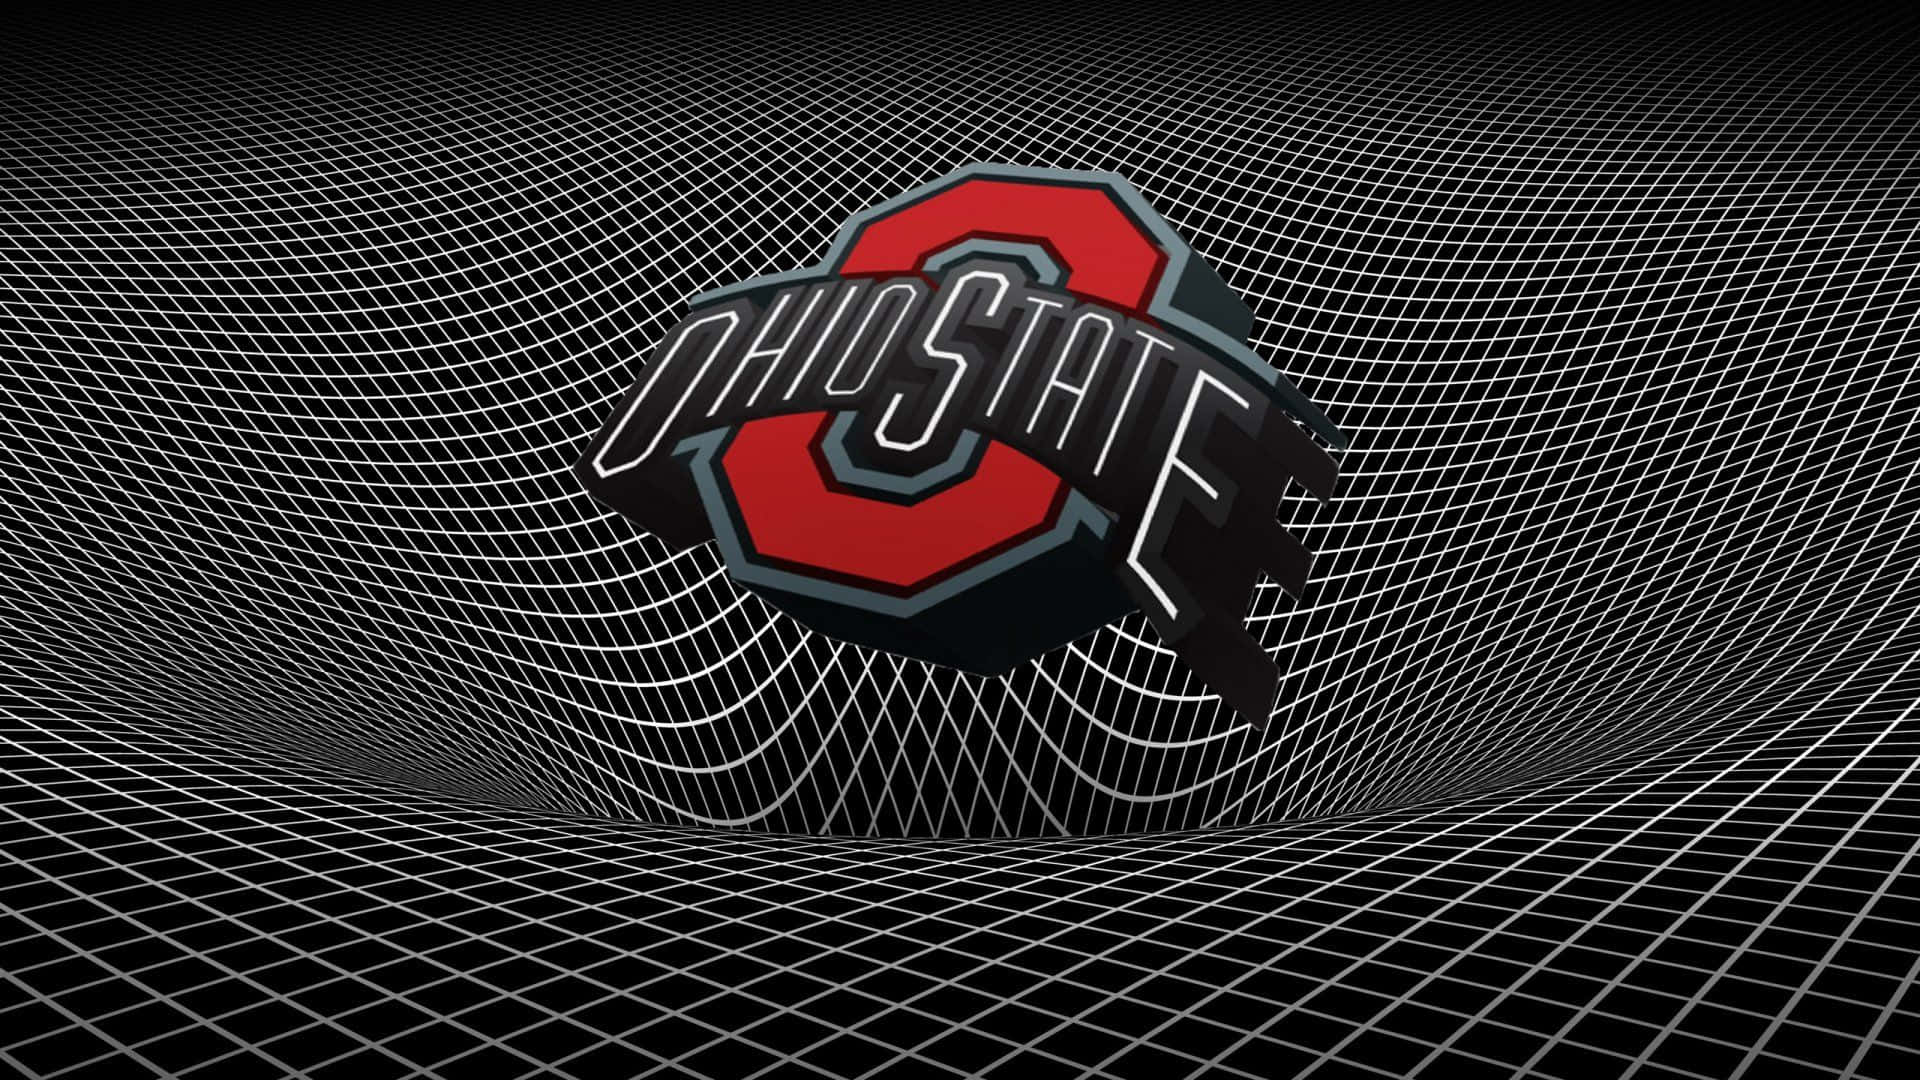 Cool Ohio State Background Wallpaper